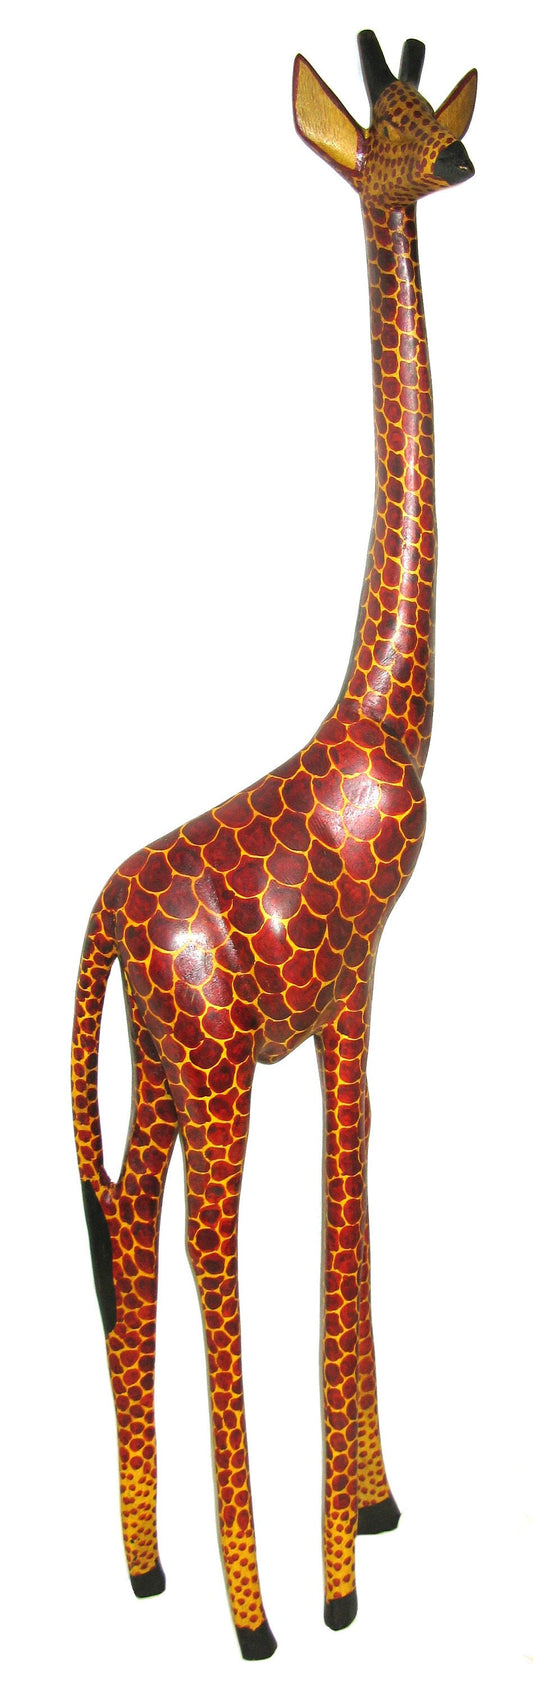 African Giraffe Carving in Wood Choose Size 4 foot (120 cm) / 3 foot (90 cm) / 2 foot (60 cm) Tall Fair Trade with Story-card